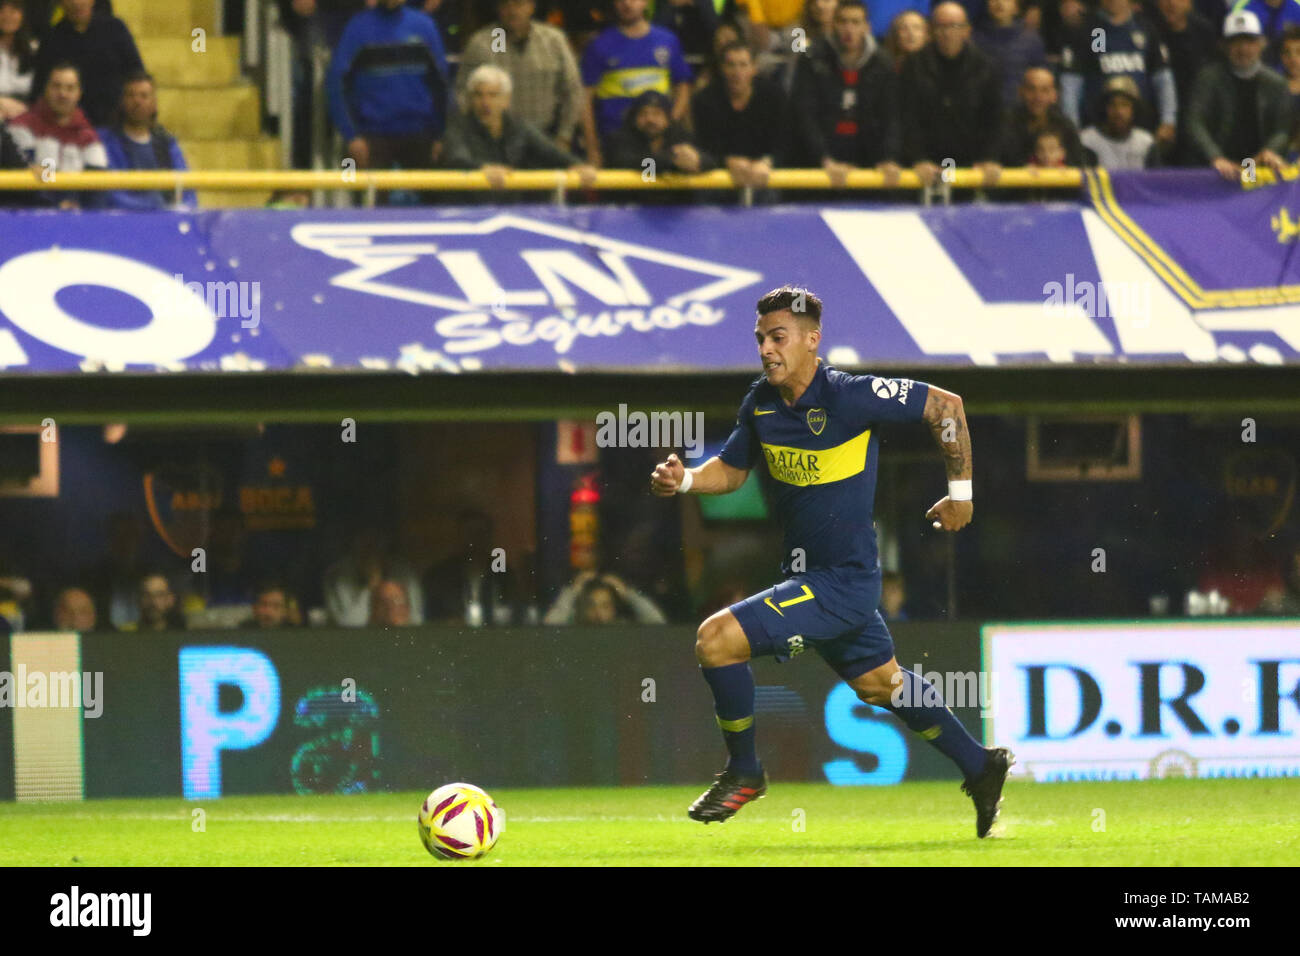 BUENOS AIRES, 26.05.2019: Cristian Pavon during the match between Boca Juniors and Argentinos Juniors and for semifinal match of Copa Superliga Argent Stock Photo